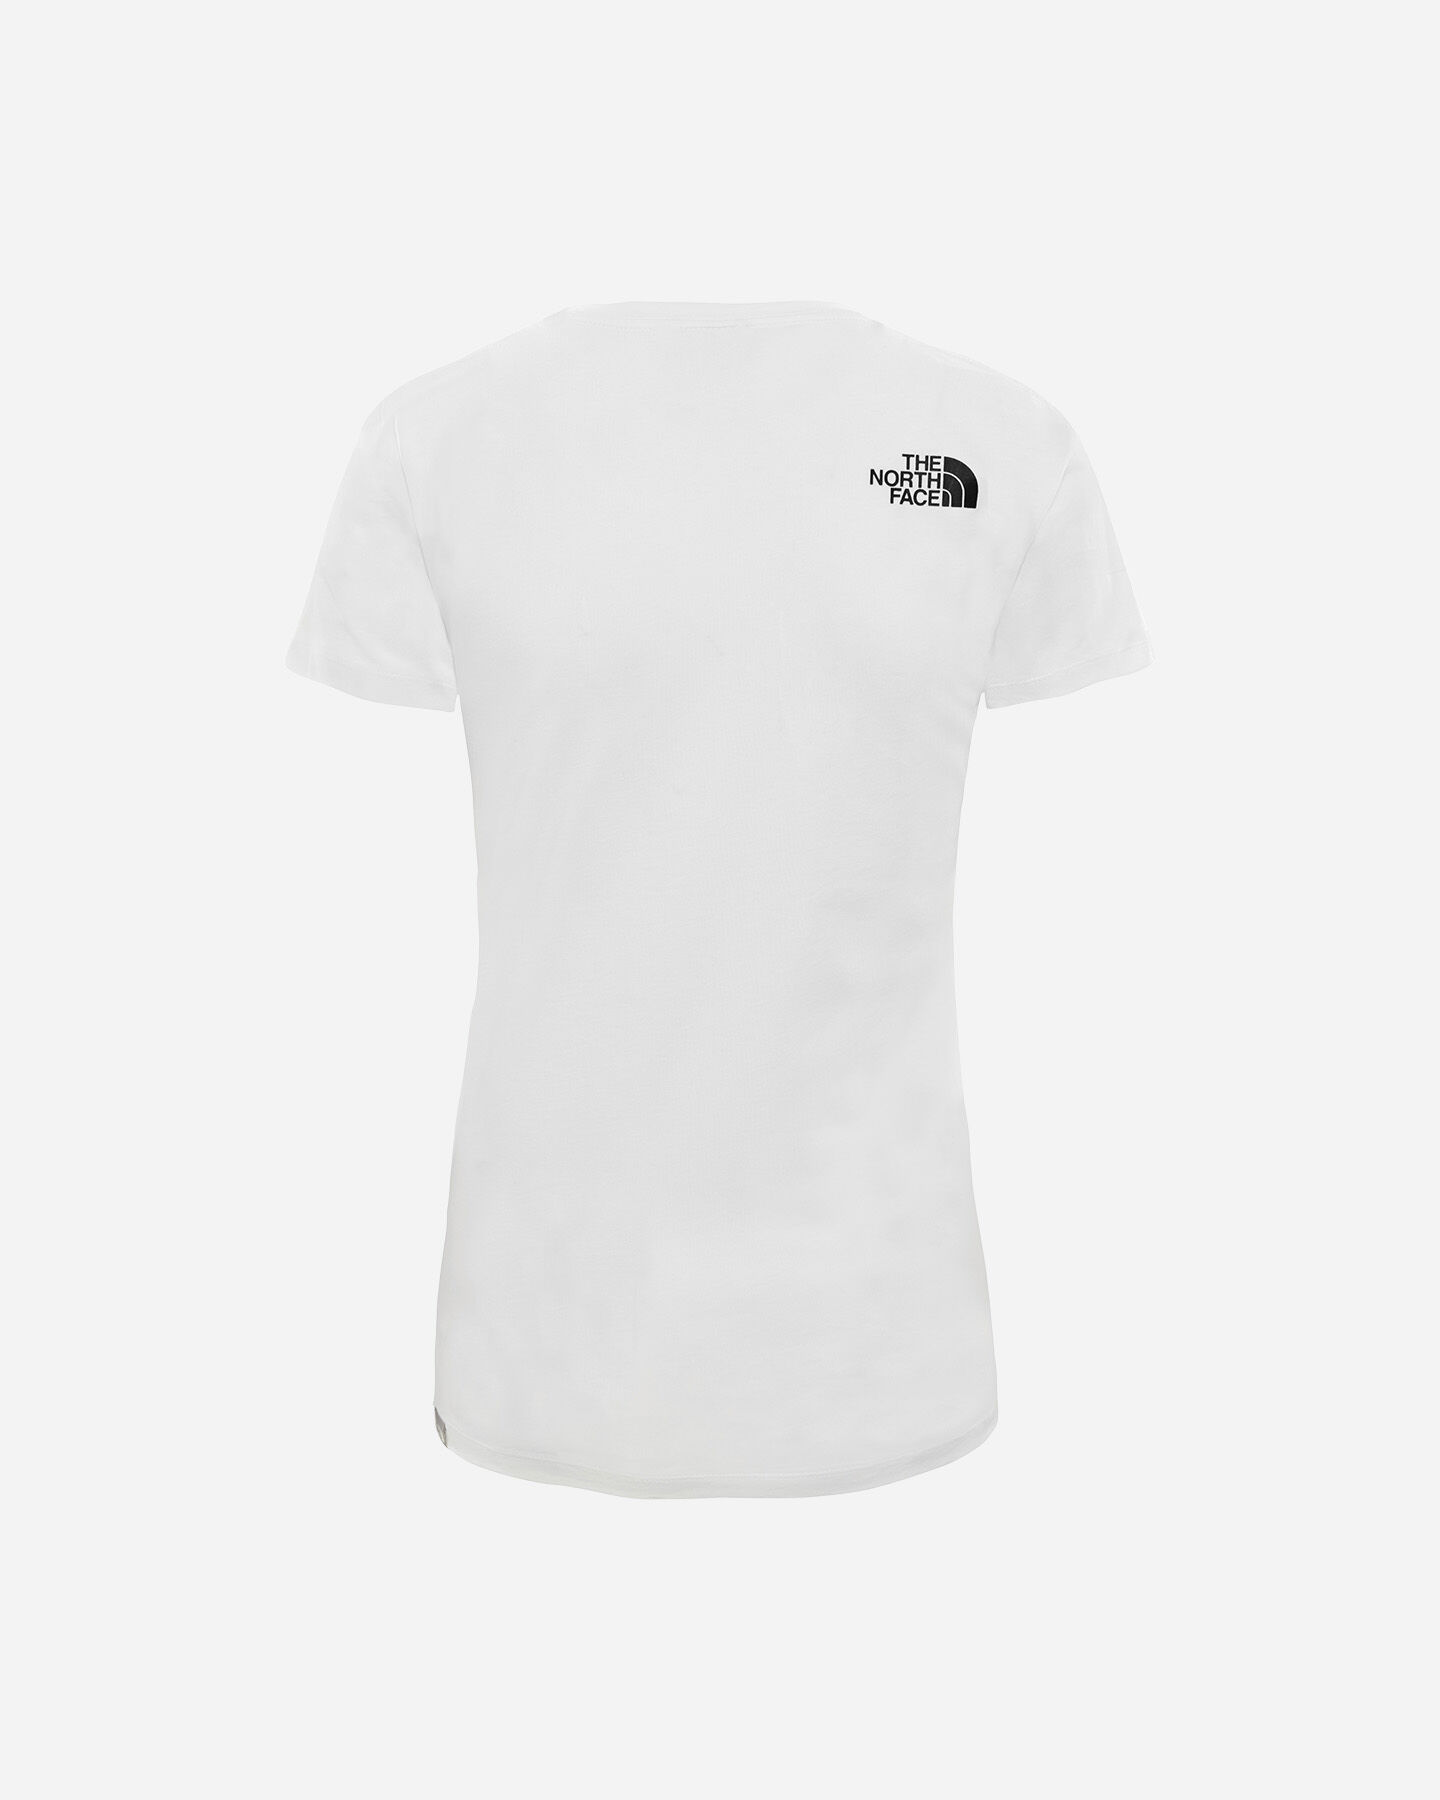  T-Shirt THE NORTH FACE EASY W S5015032|LG5|S scatto 1